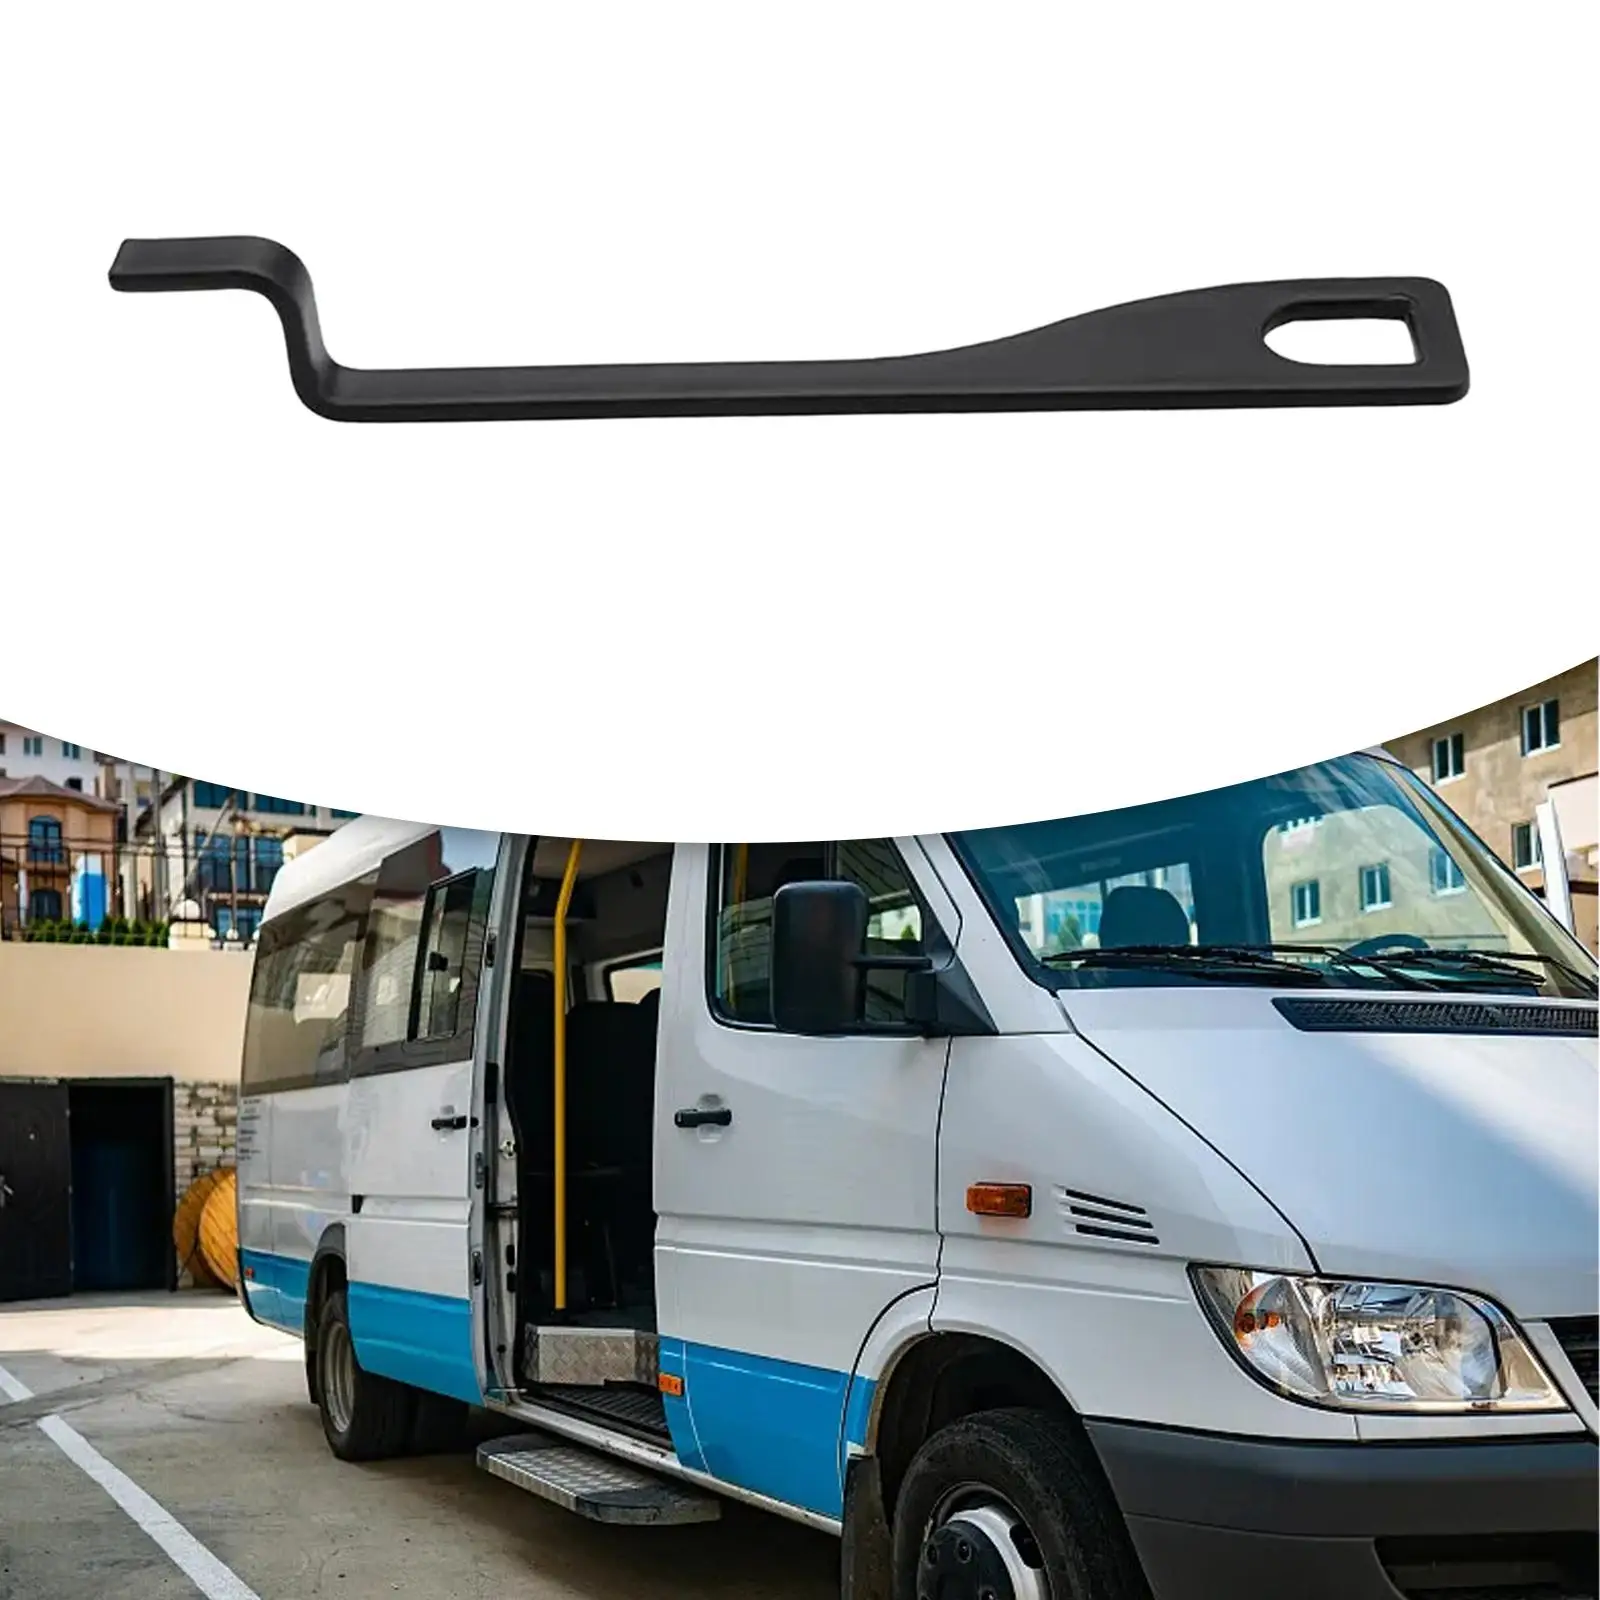 Tailgate Barn Door Standoff Assembly Easy Installation Air Vent Lock Hook Camping Car Accessories for Volkswagen T4 T5 T6